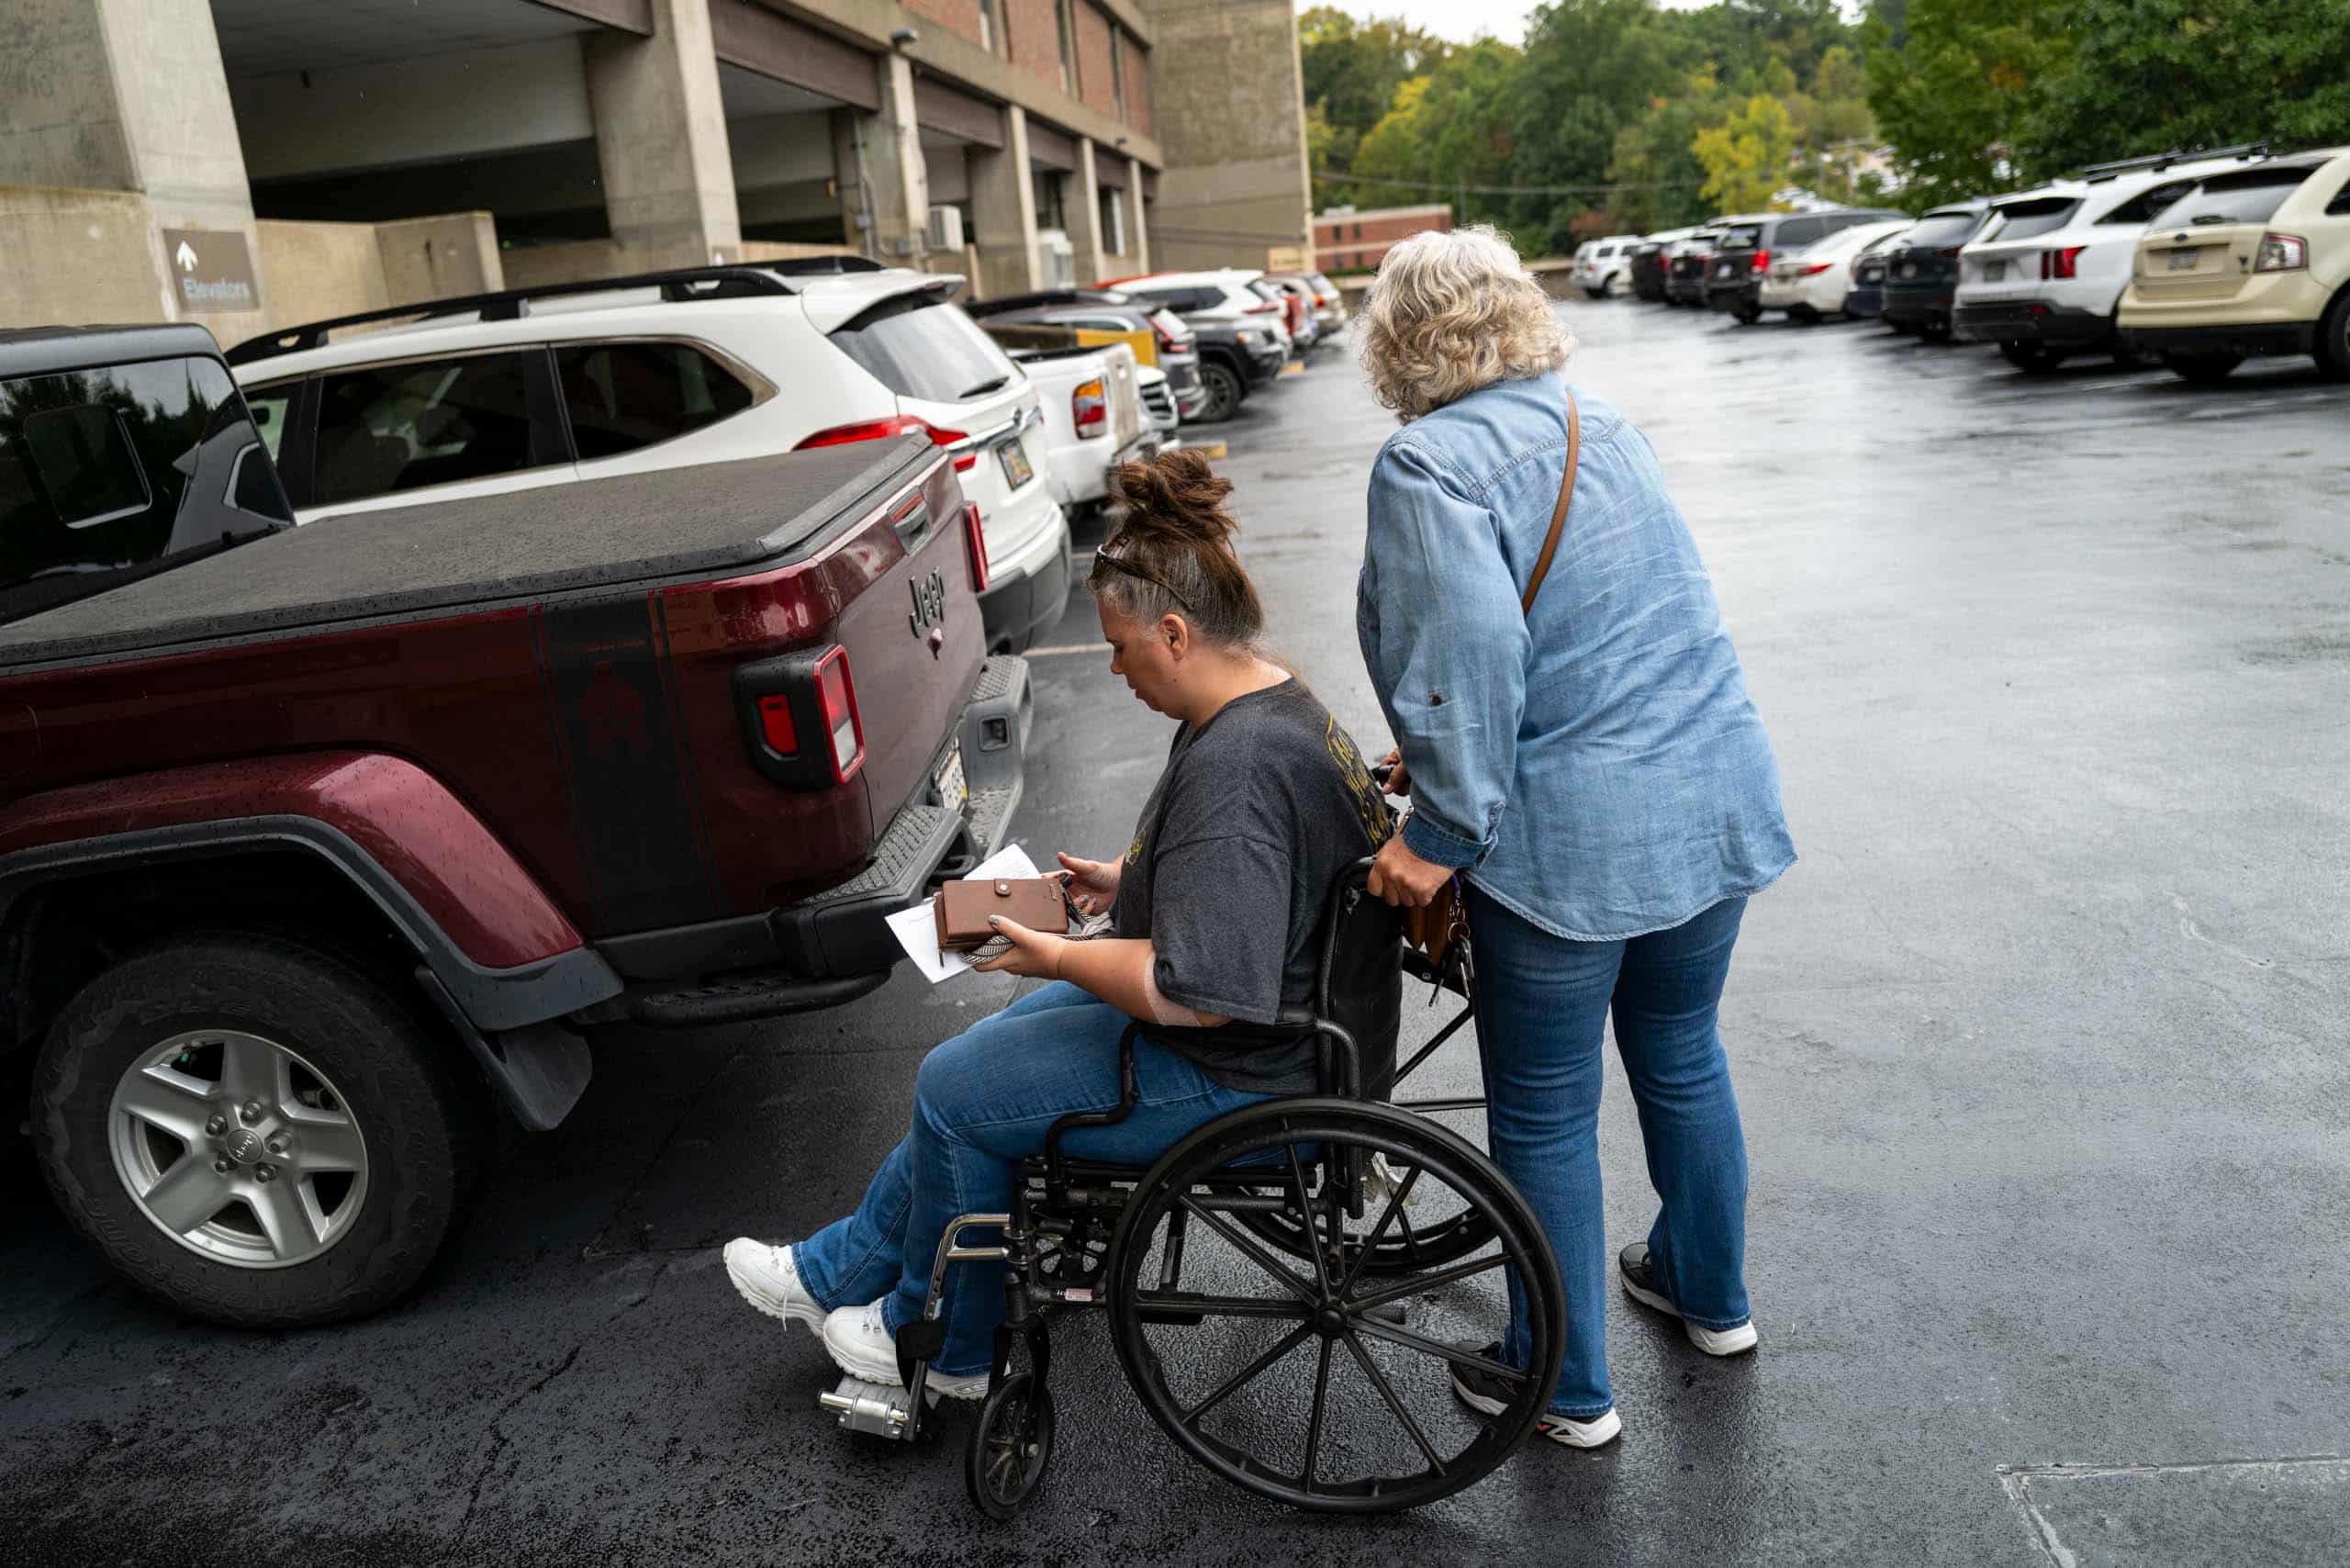 A woman in a wheelchair is pushed by another woman in a parking lot.